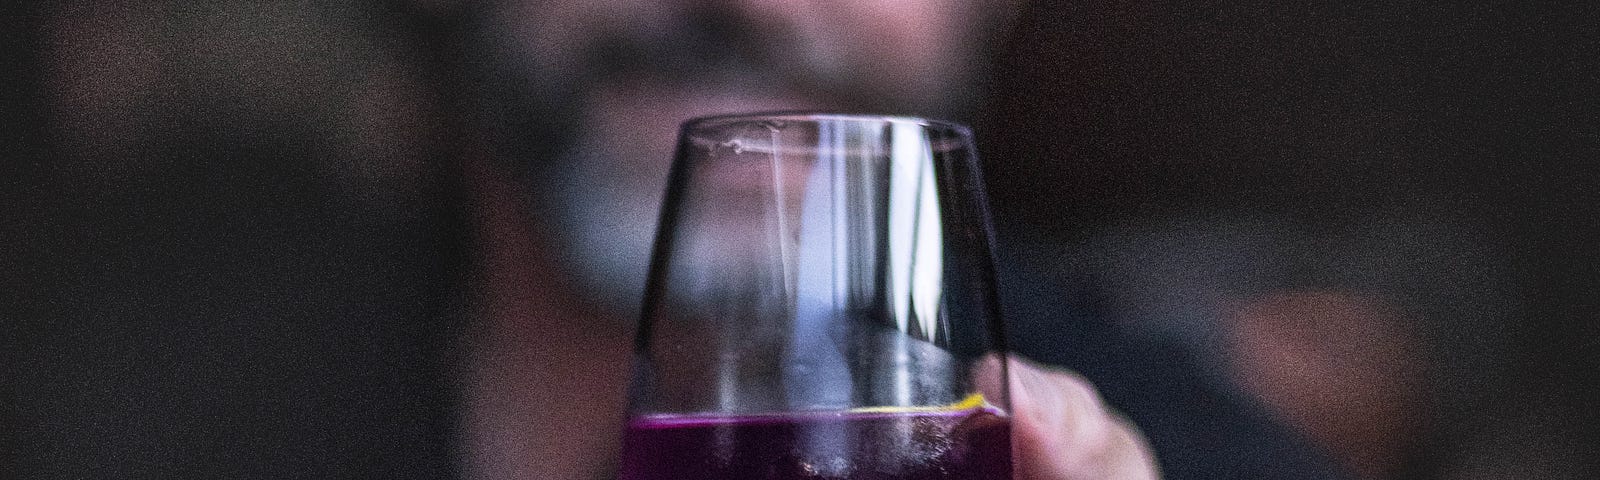 A tainted glass of wine is offered by a creepy bartender.